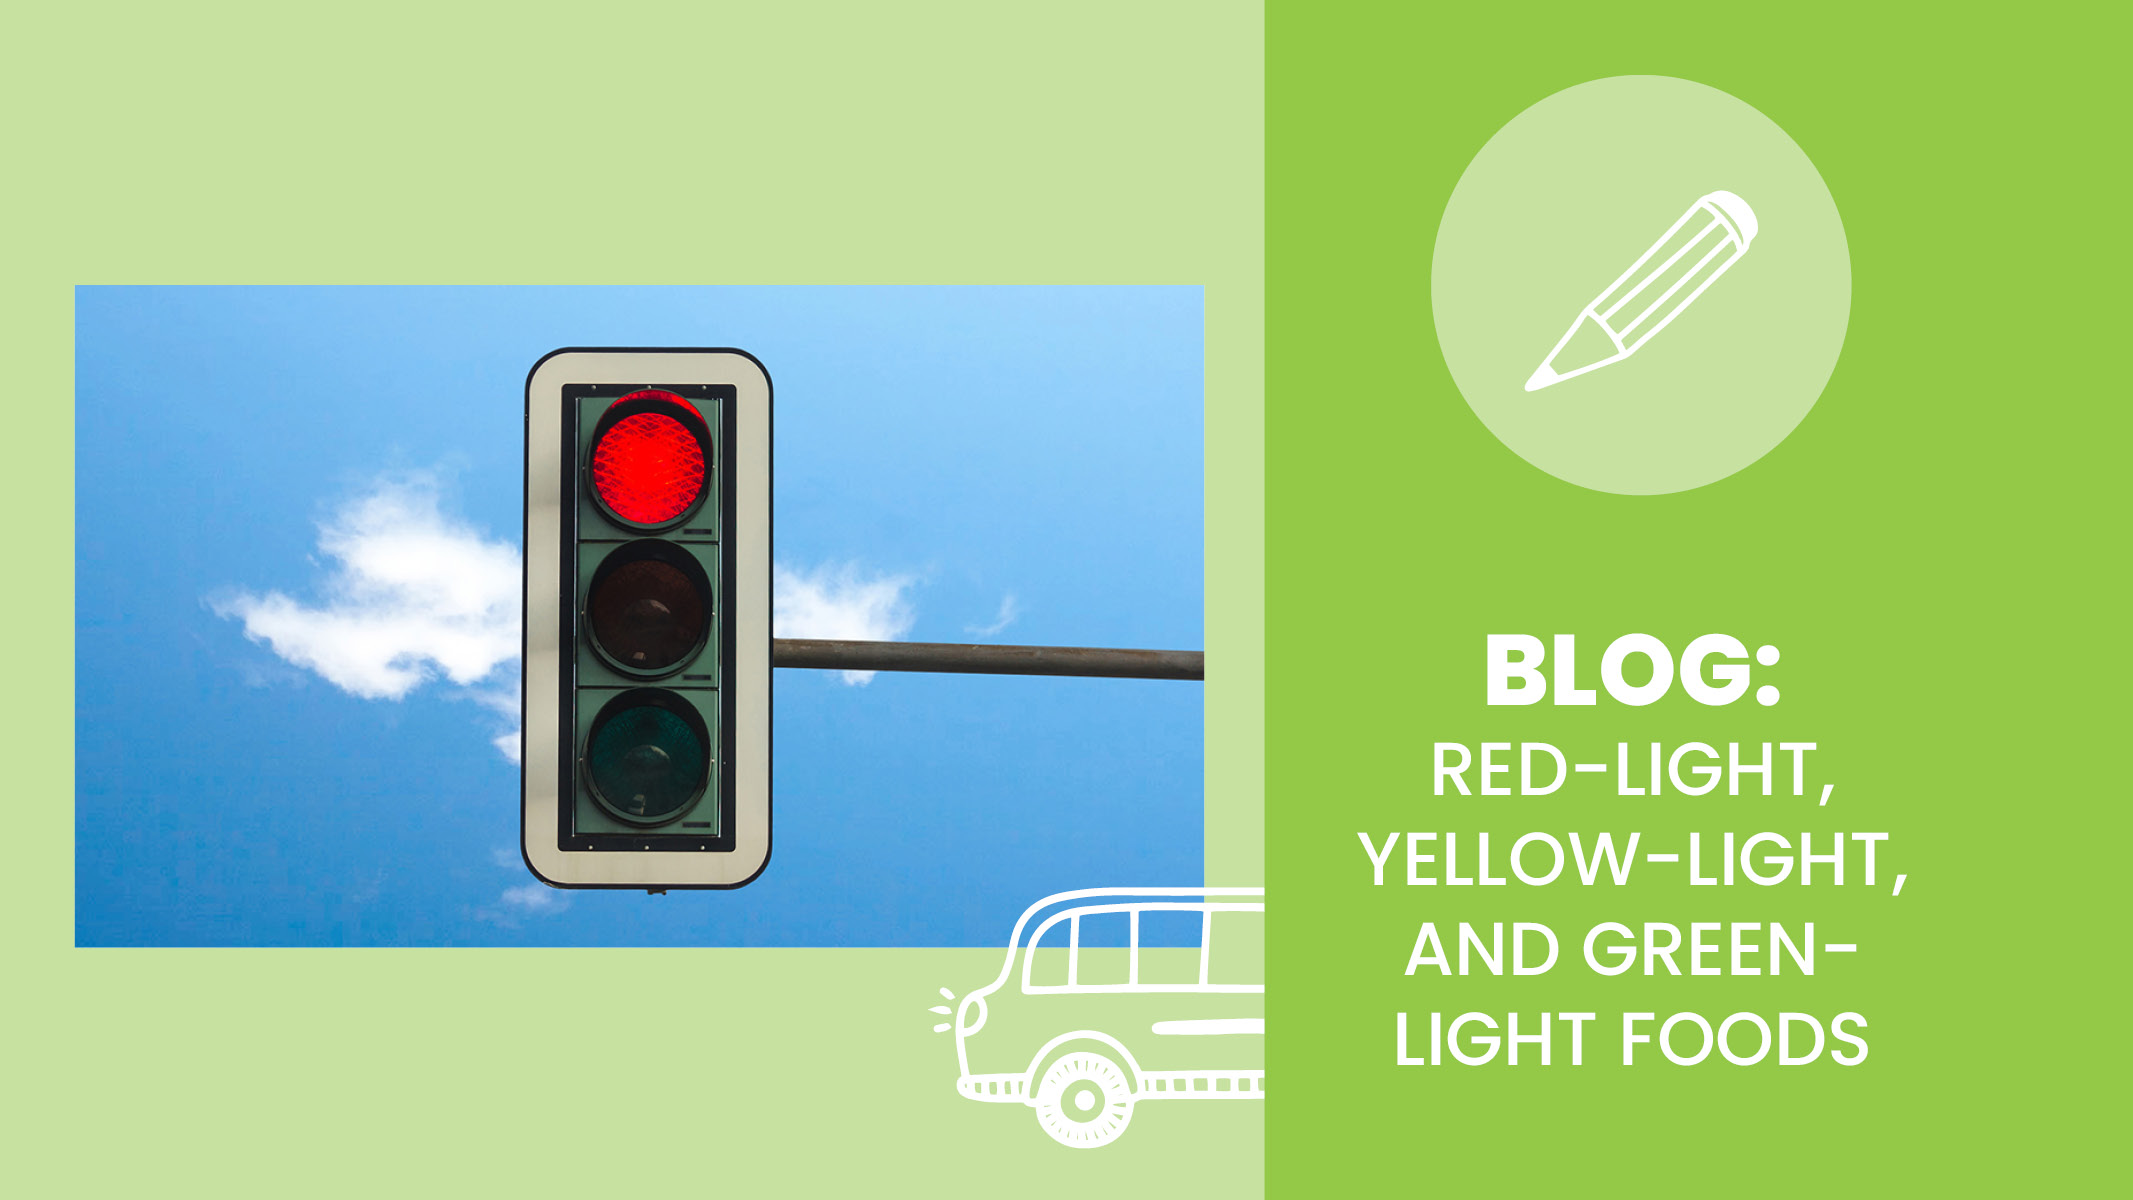 A red-light shines on a traffic light to represent unhealthy food choices